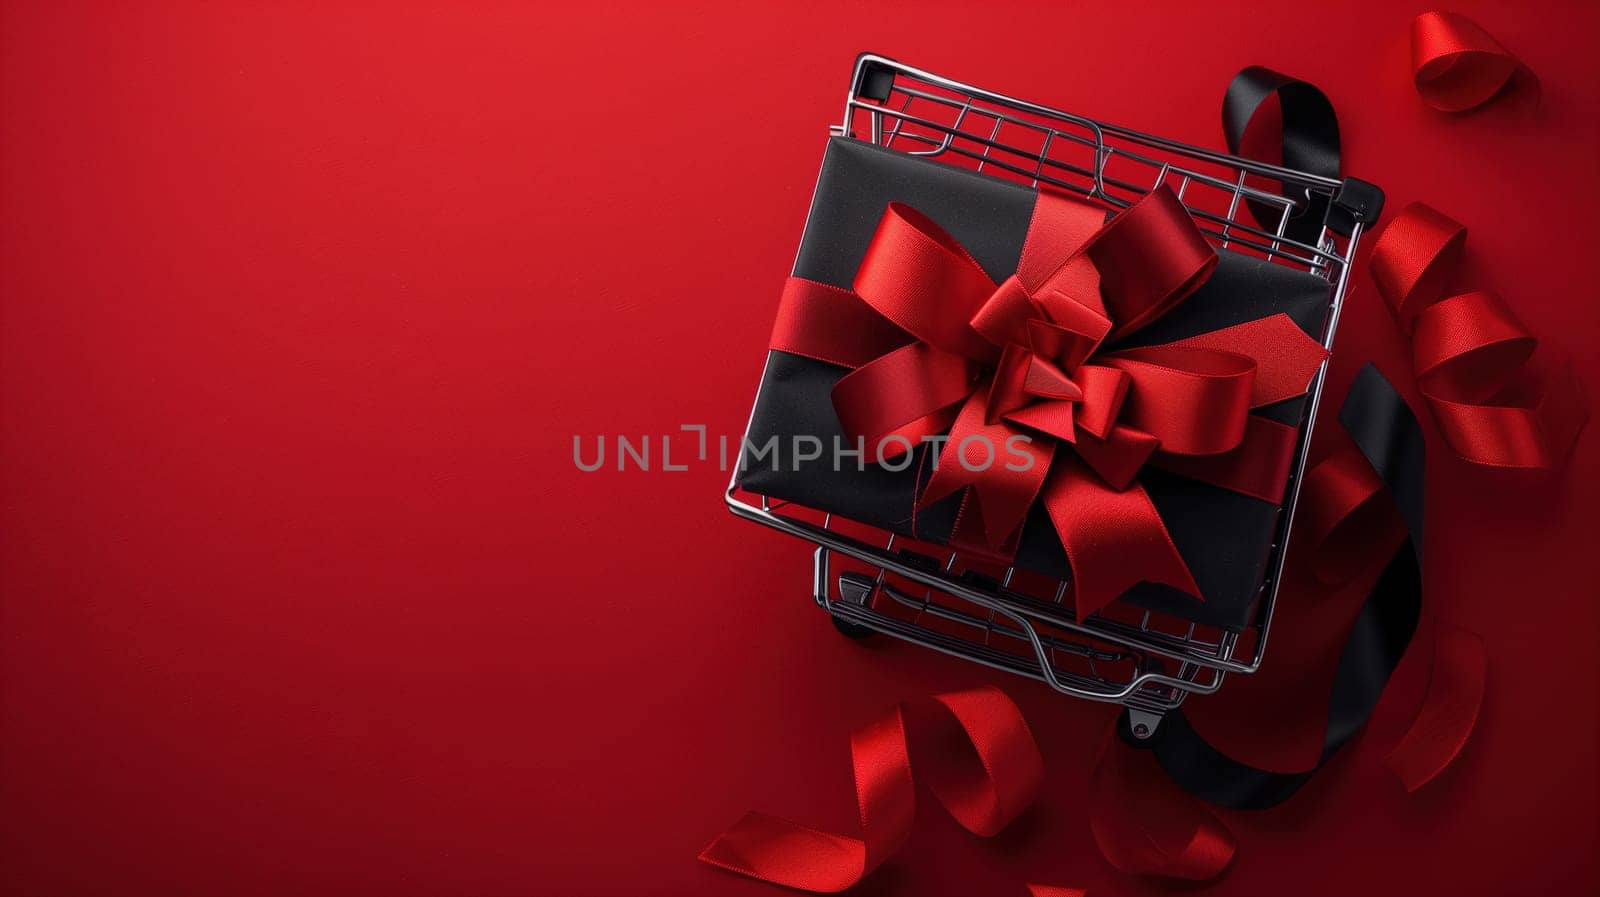 Shopping Cart With Red Bow for Sale Concept by TRMK